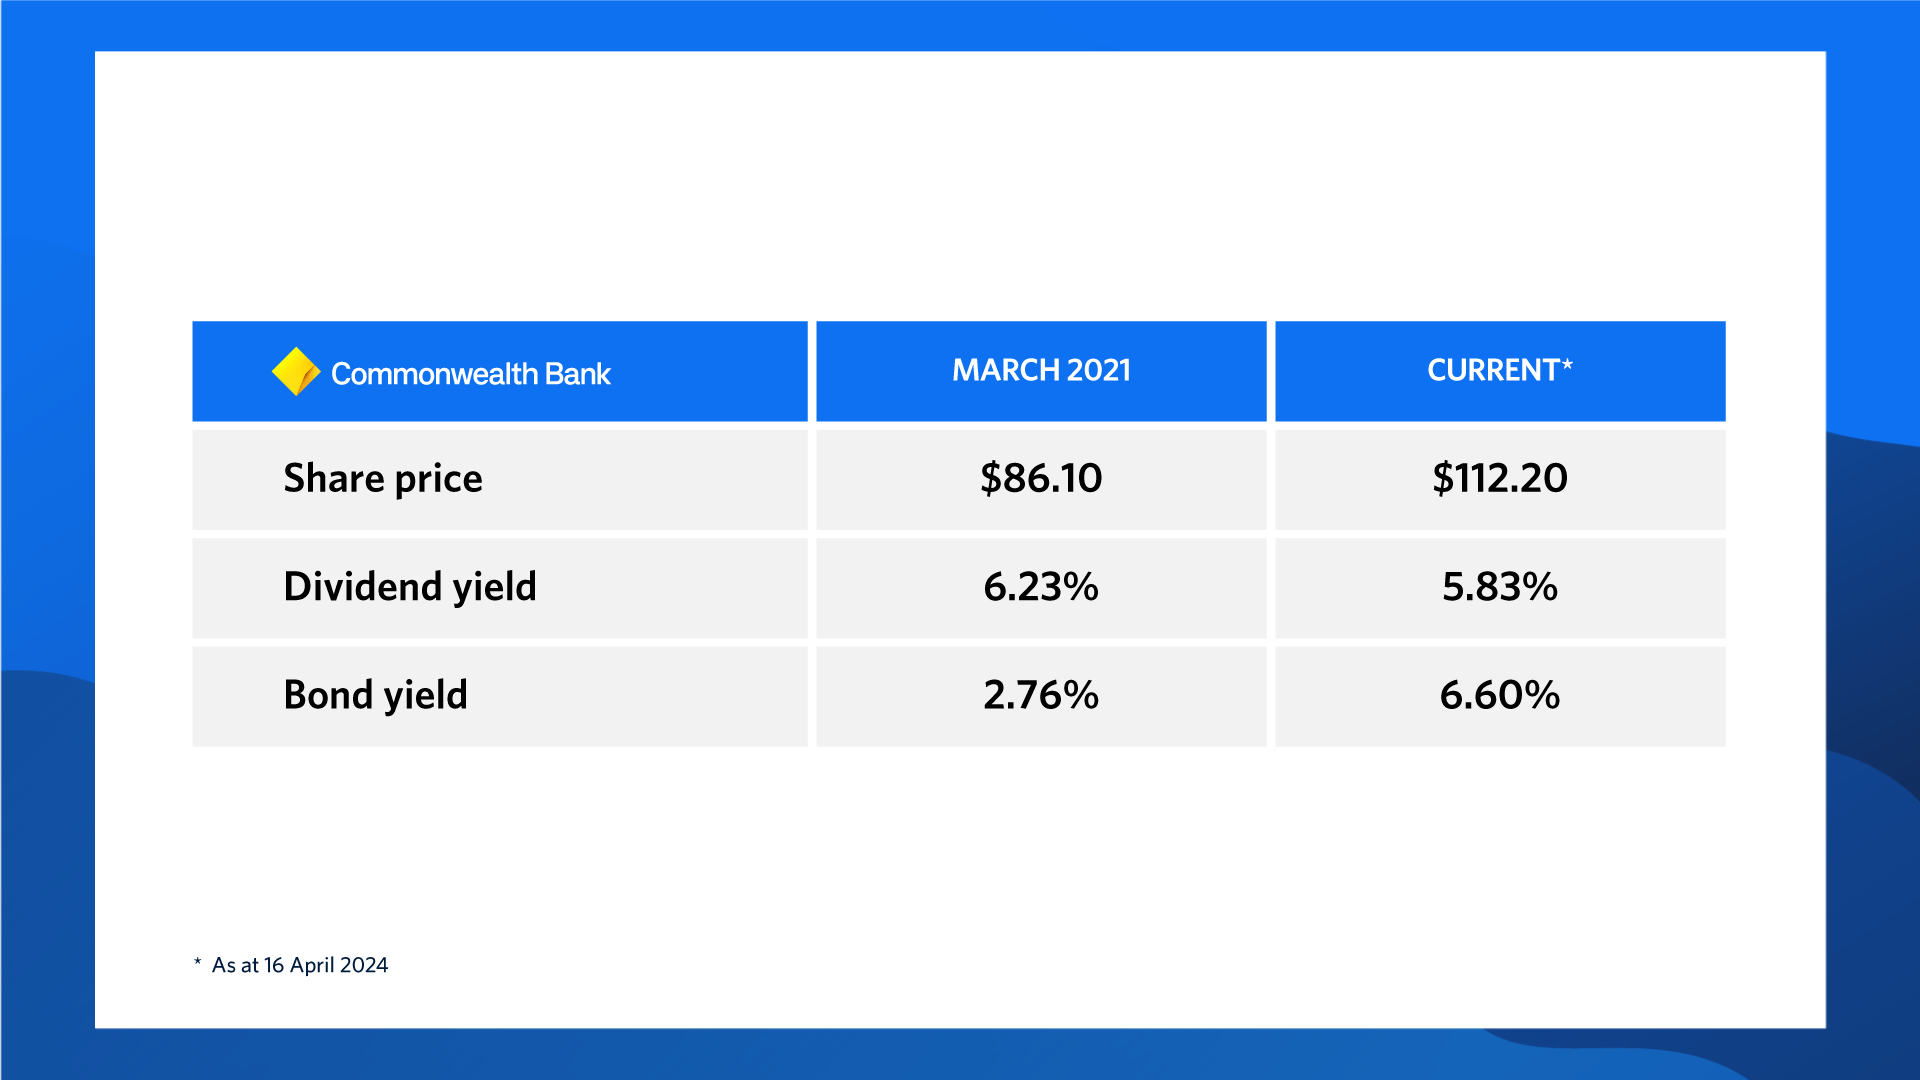 Chart 5: A table showing the CBA share price, dividend yield and bond yield in March 2021, as well as current figures. The share price at March 2021 is $86.10, the dividend yield 6.23%, and the bond yield at 2.76%. The current share price is $112.20, the current dividend yield 5.83%, and the current bond yield 6.60%. 